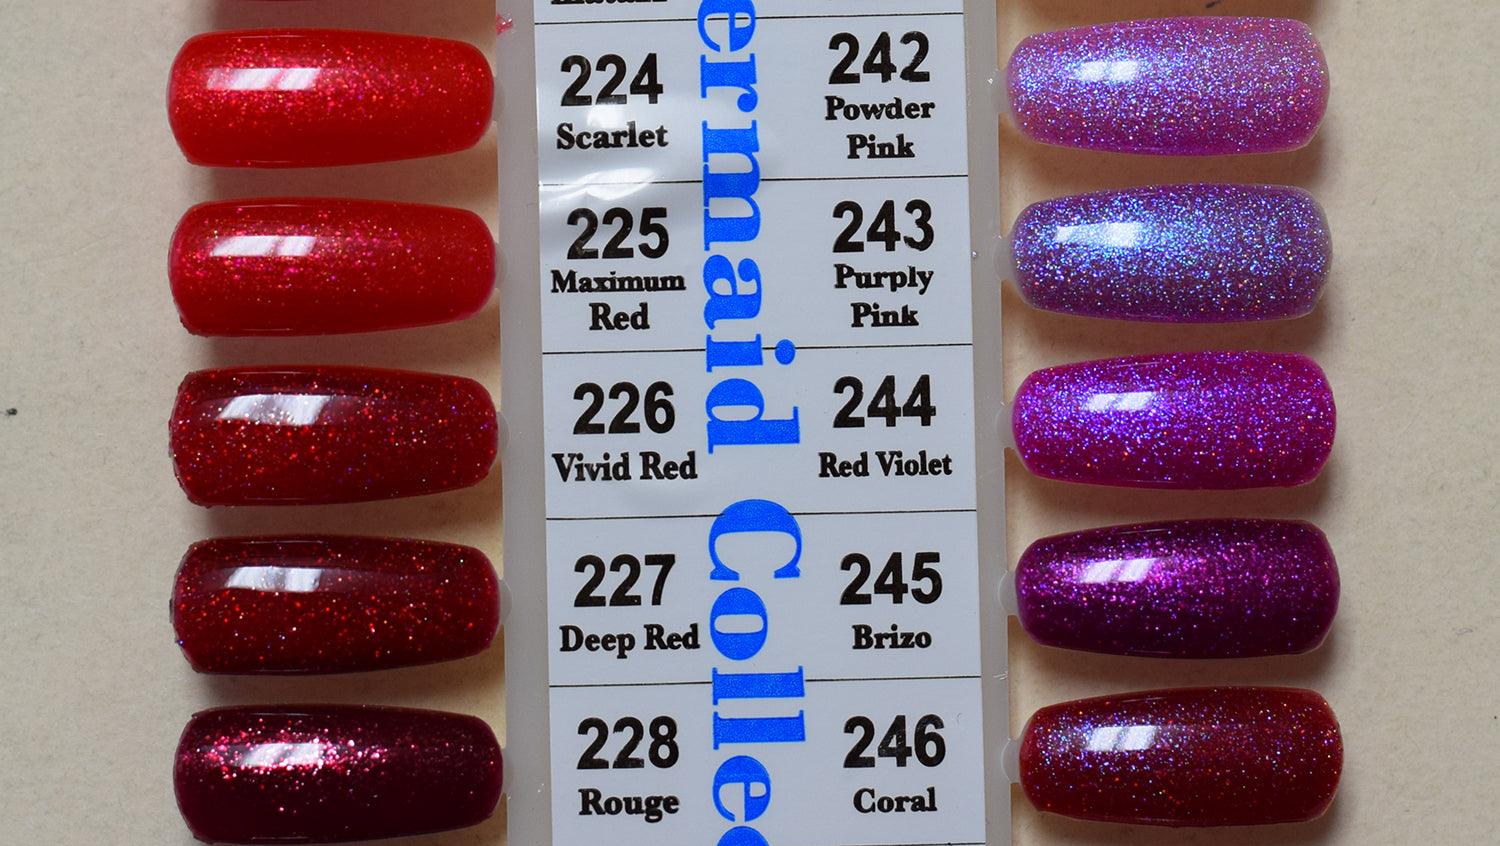 DND DC MERMAID Collection #242 Powder Pink